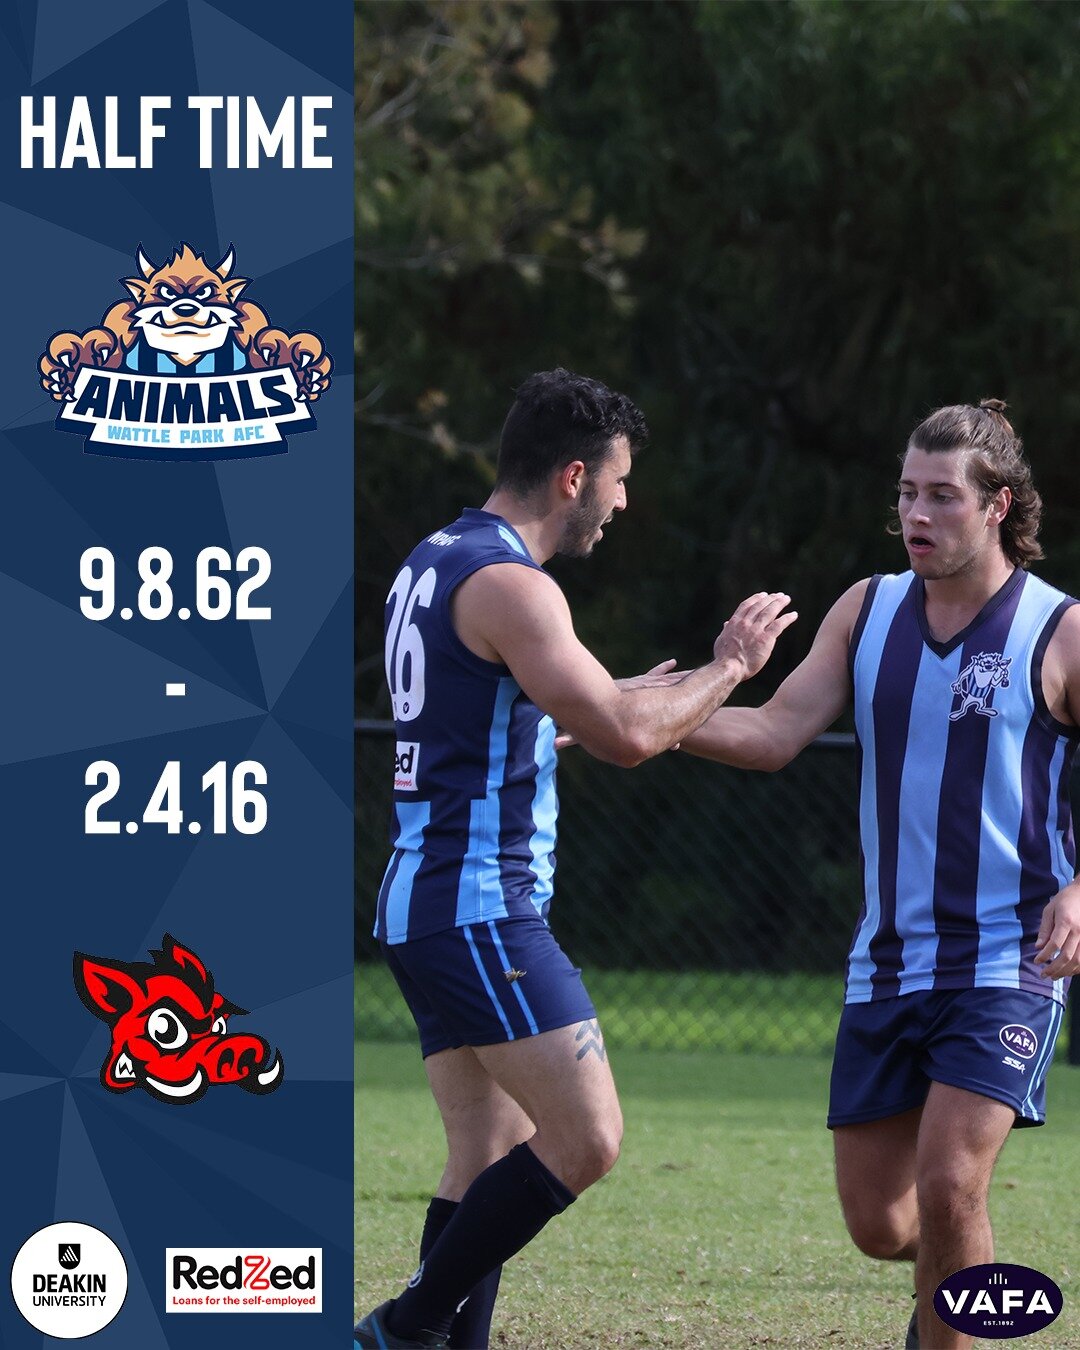 RESERVES

Matt Price with four already as the Two's start strongly

#WPvSWI #AnimalsFooty